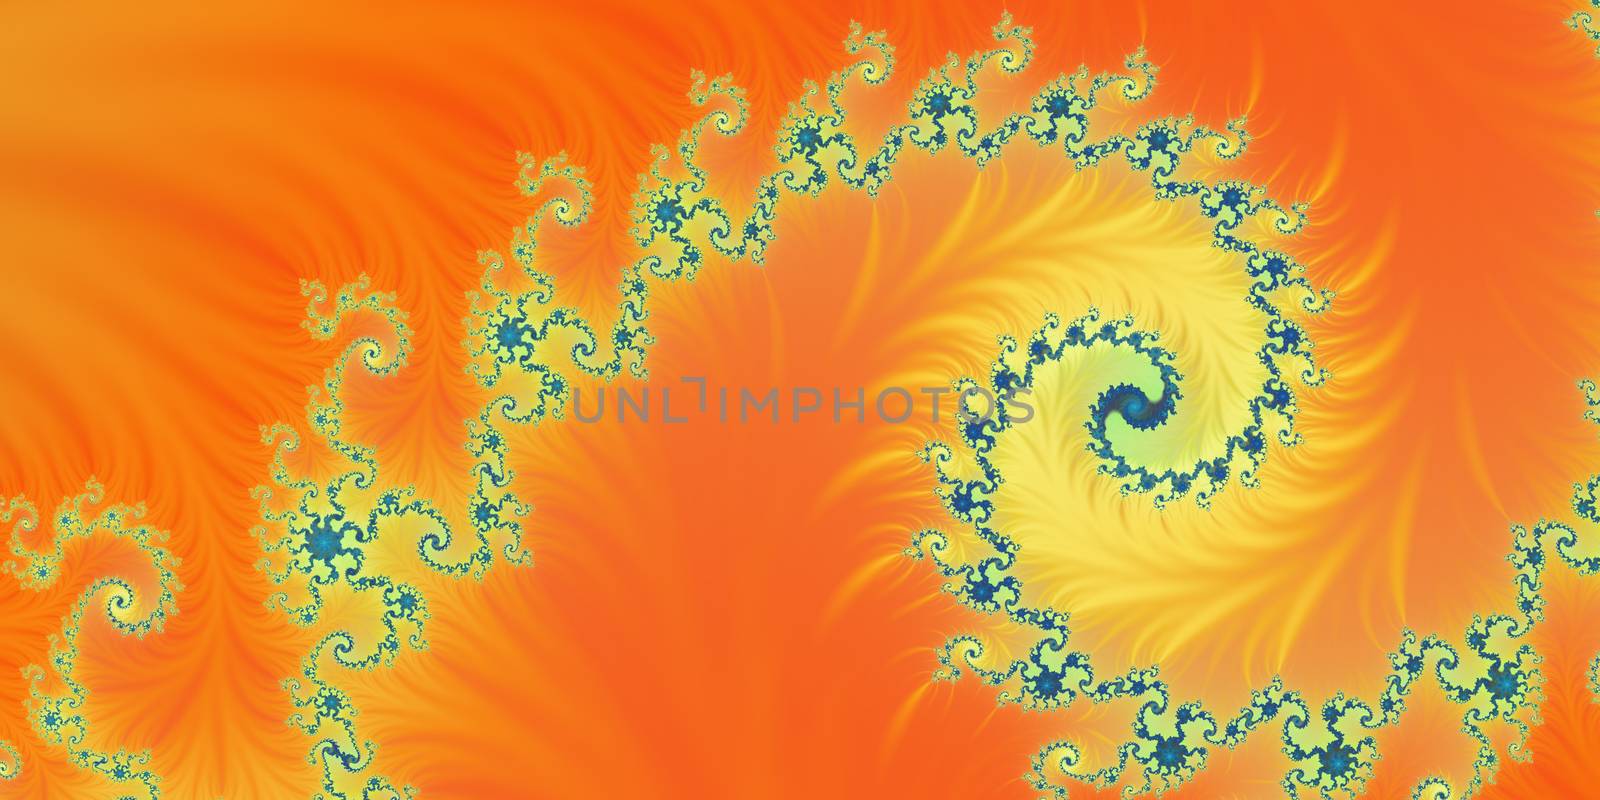 An abstract fractal design representing a summer drink with an orange color.